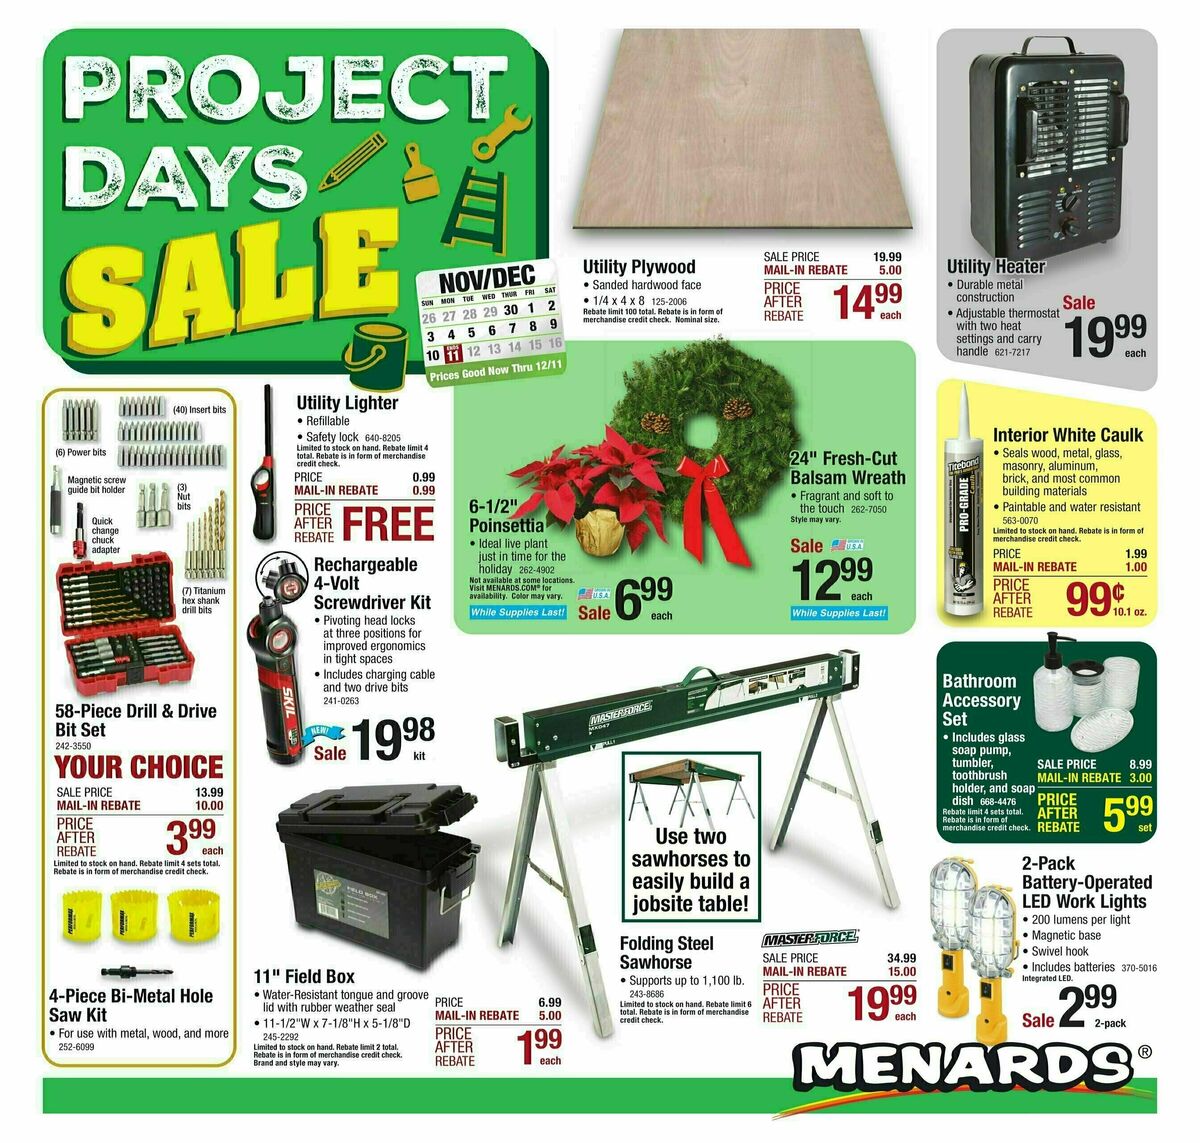 Menards Project Days Sale Weekly Ad from November 29